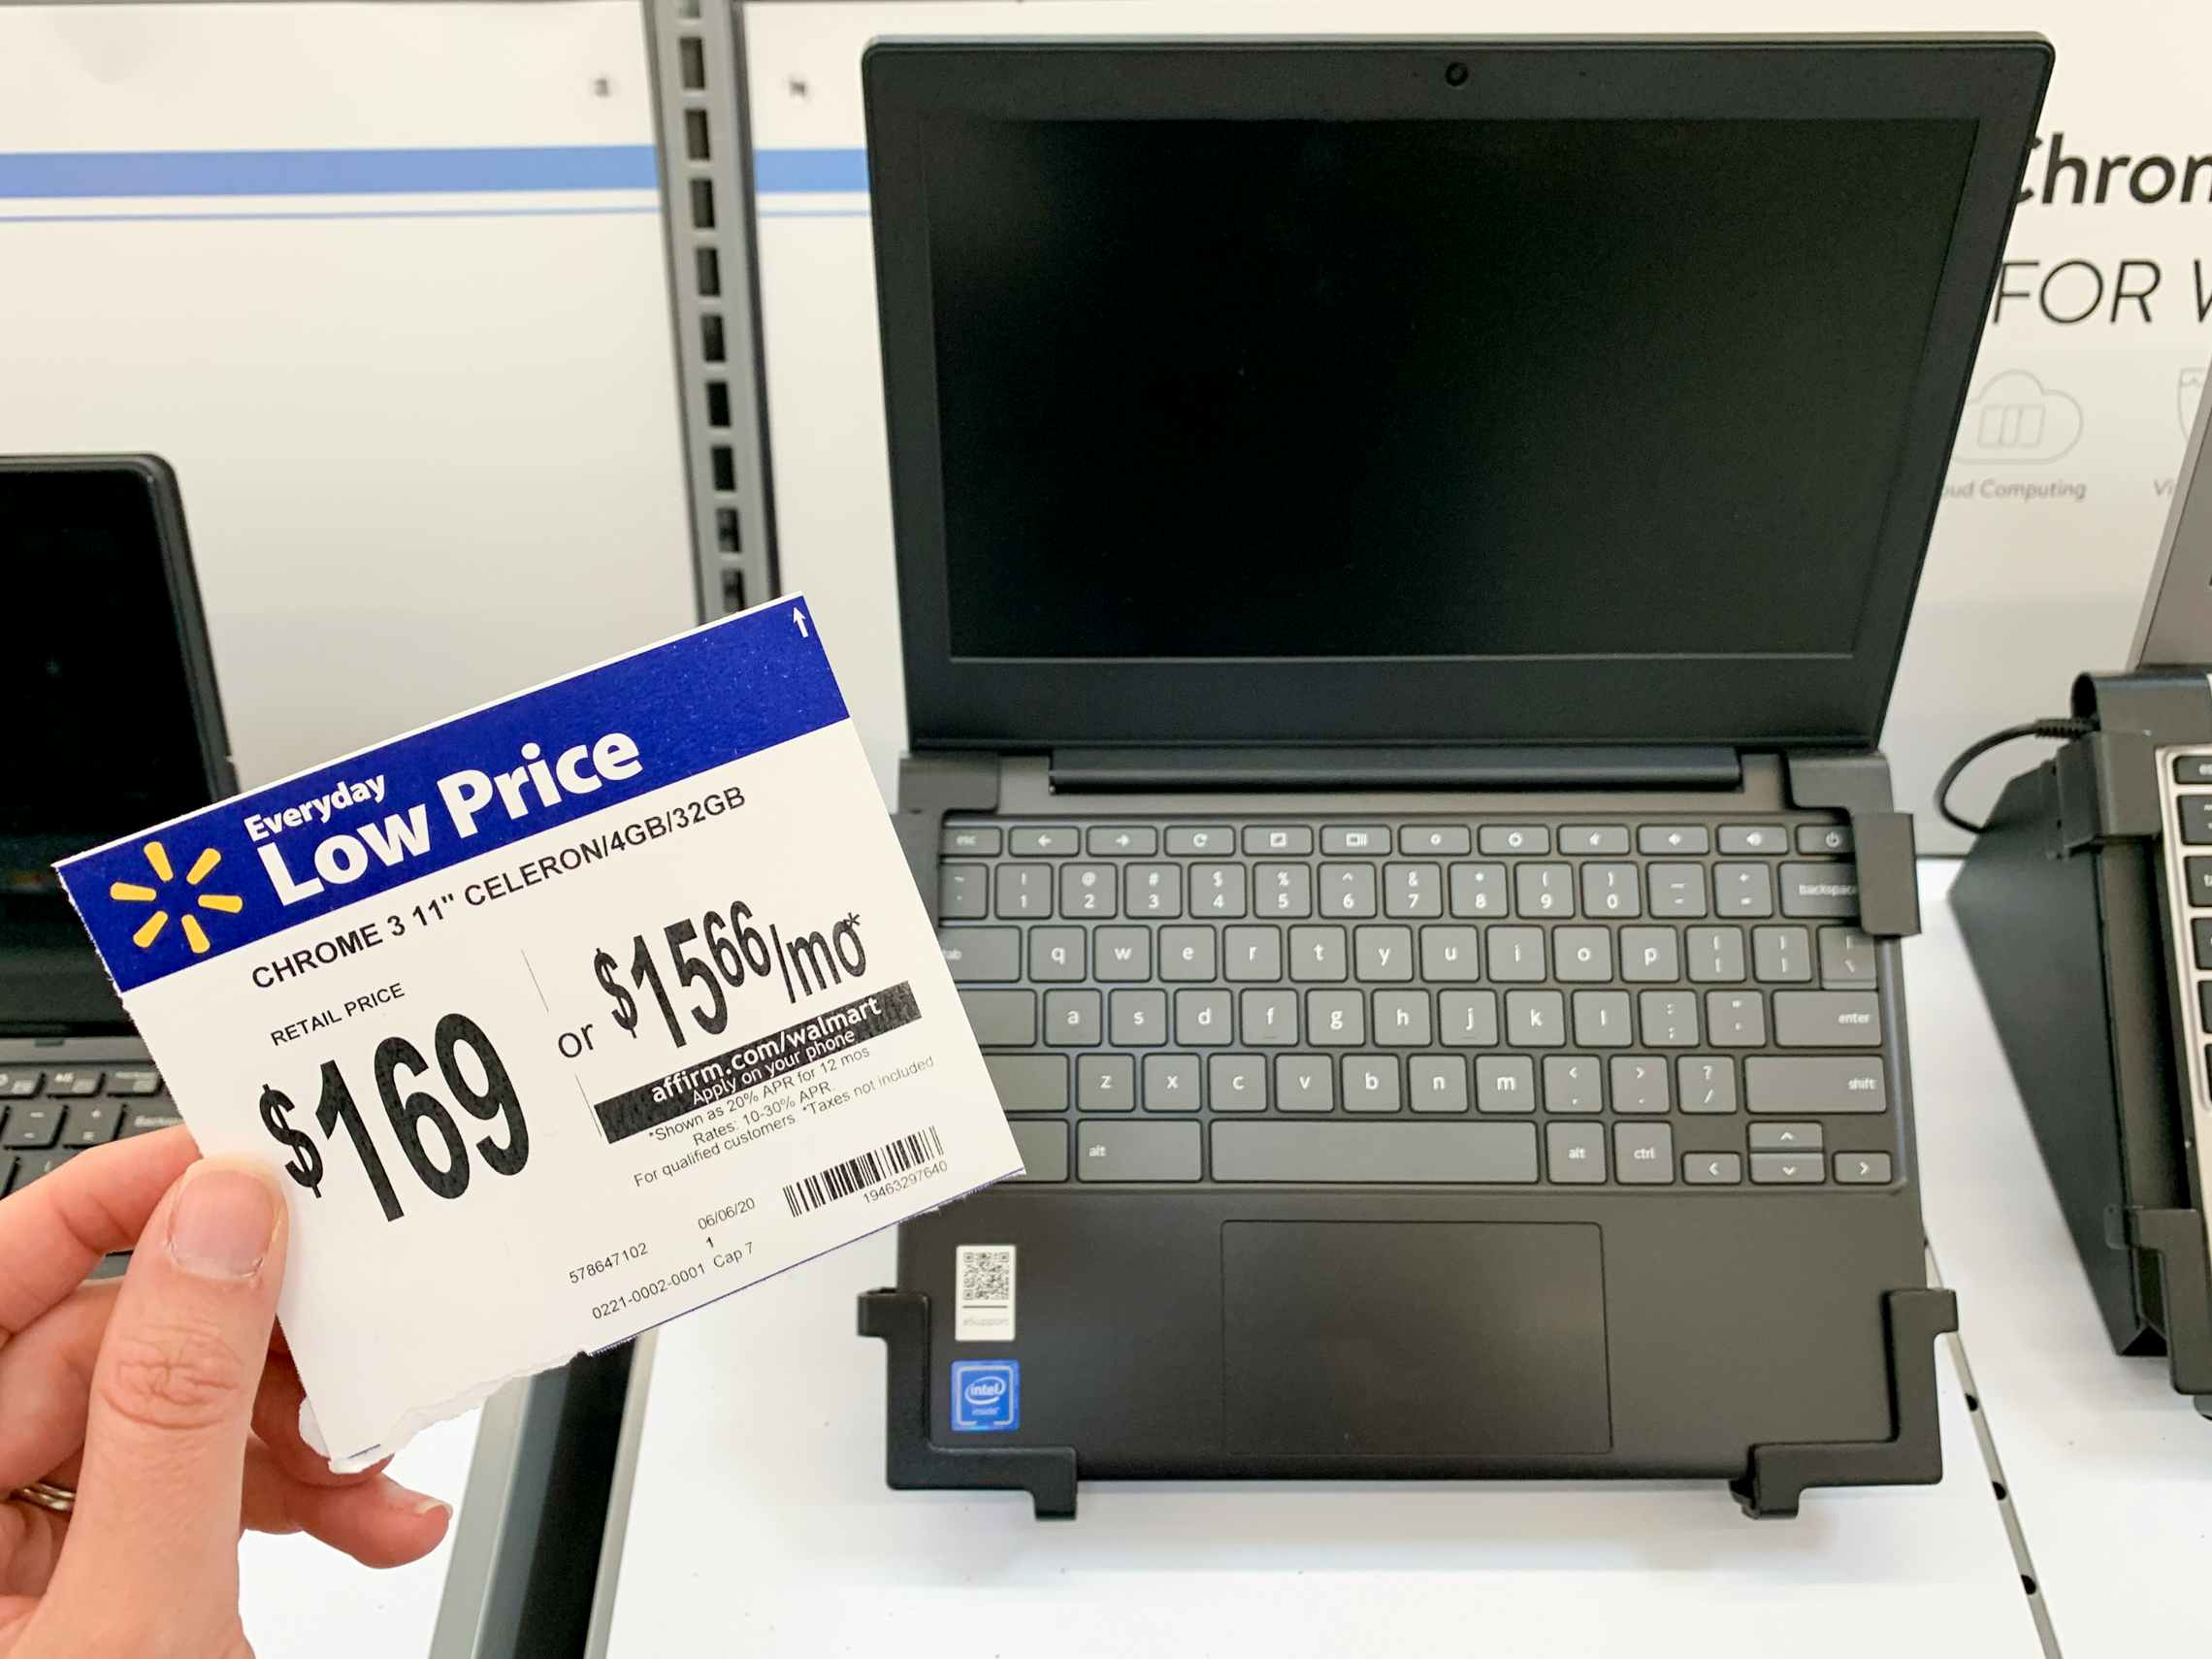 Laptop with sales price tag